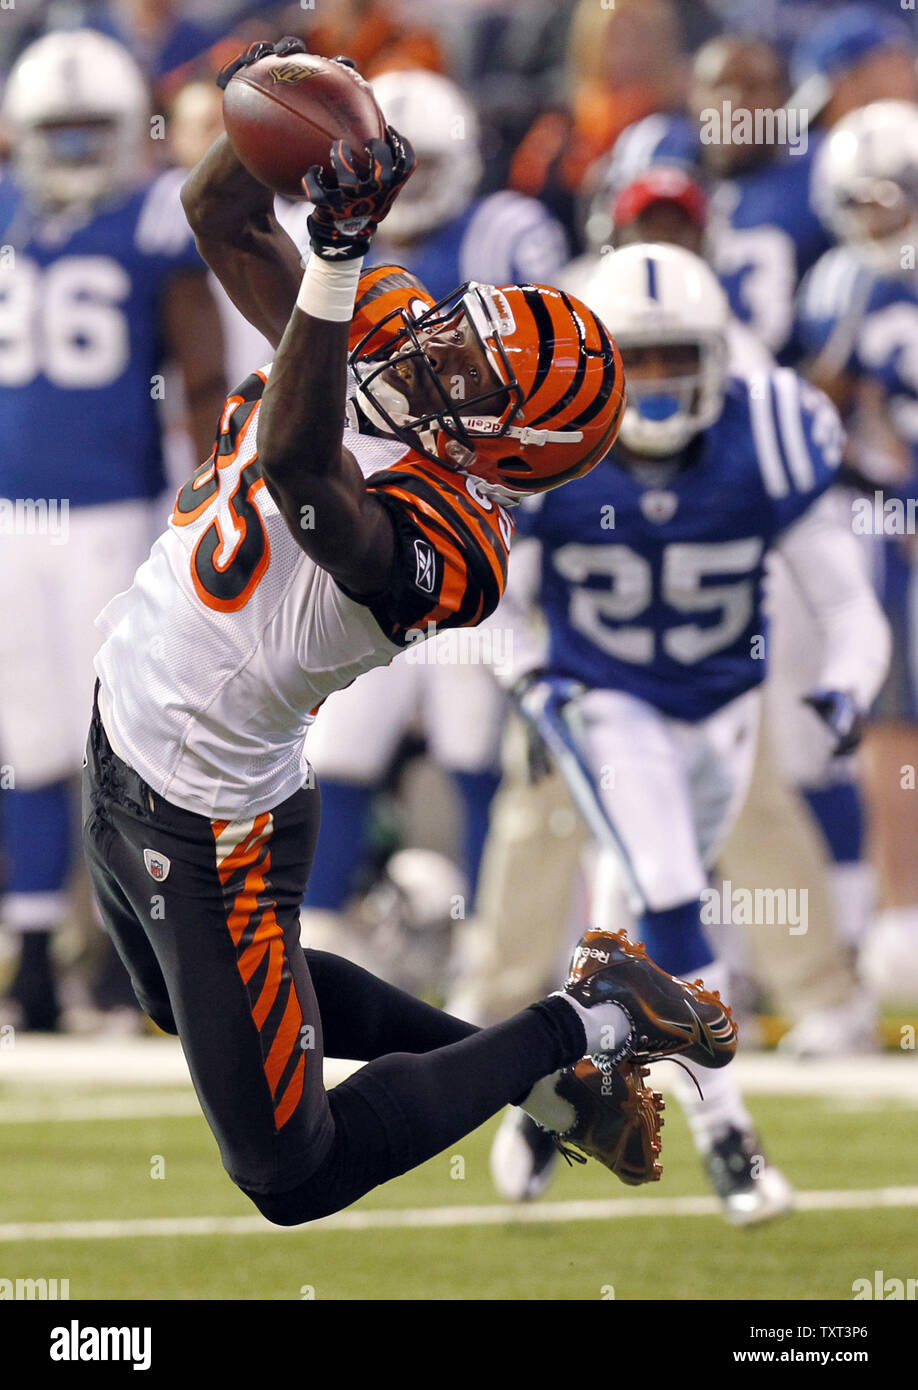 Bengals wide receiver Chad Ochocinco to change his last name back